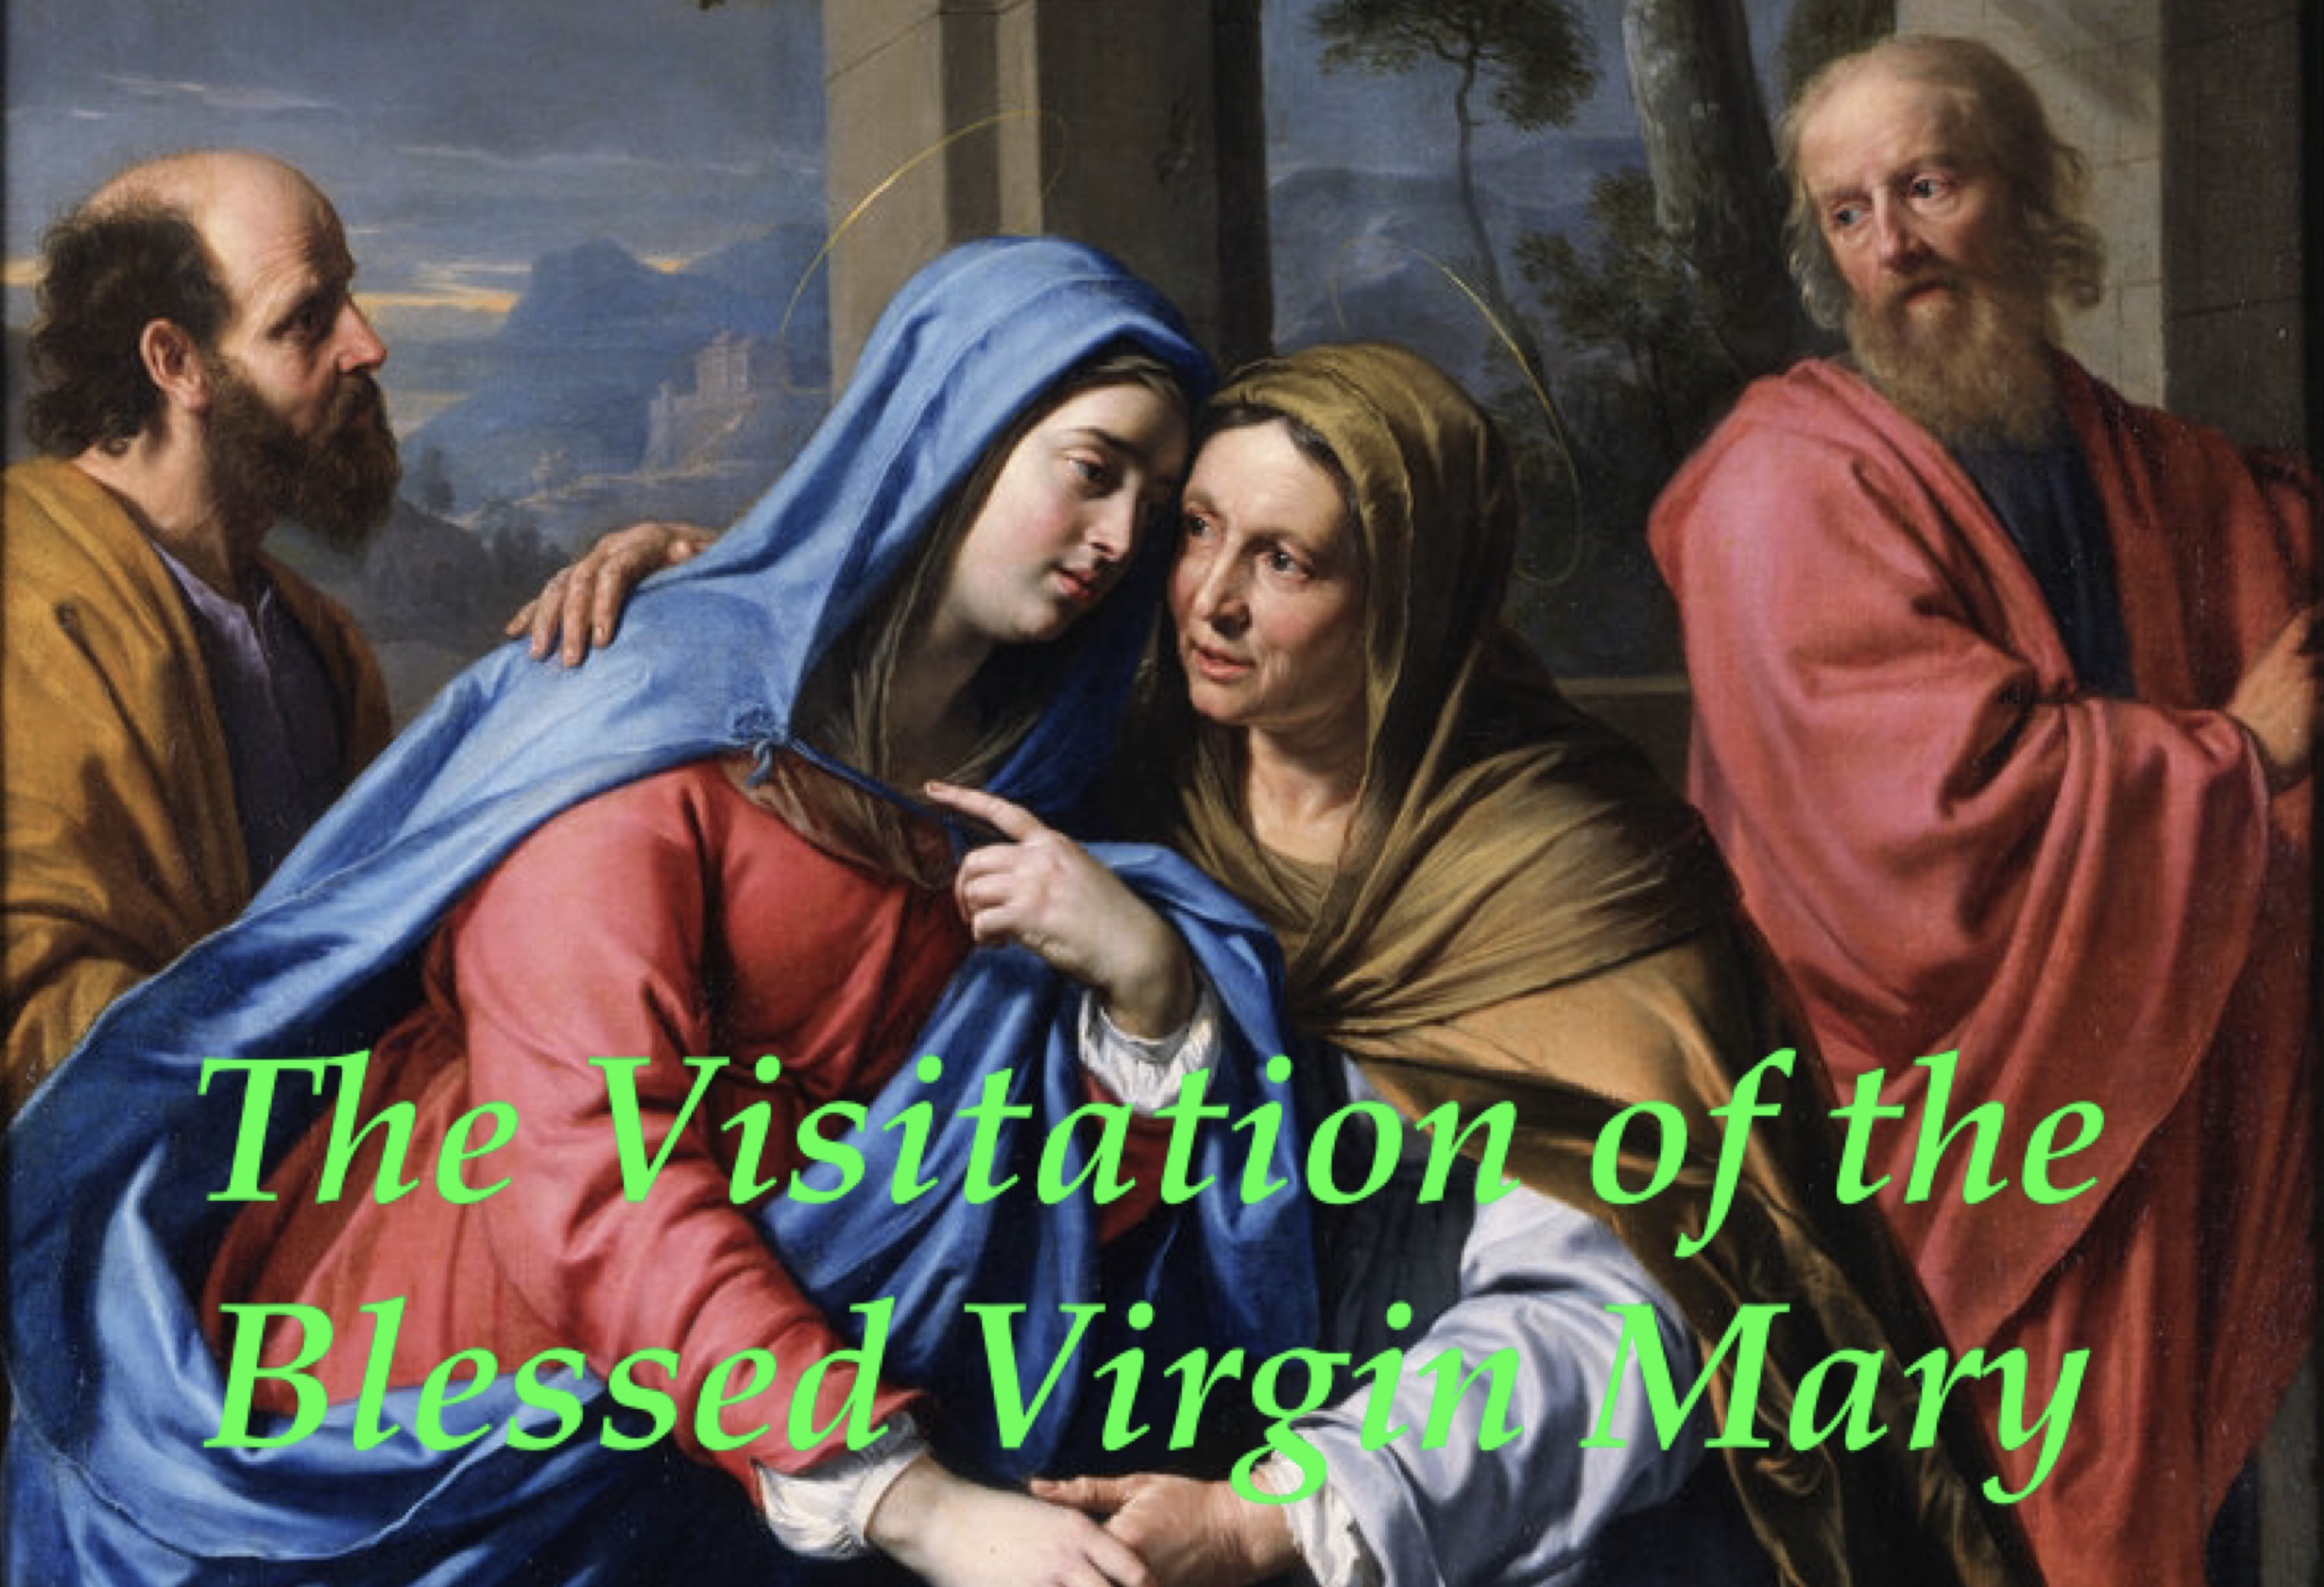 31st May - The Visitation of the Blessed Virgin Mary 